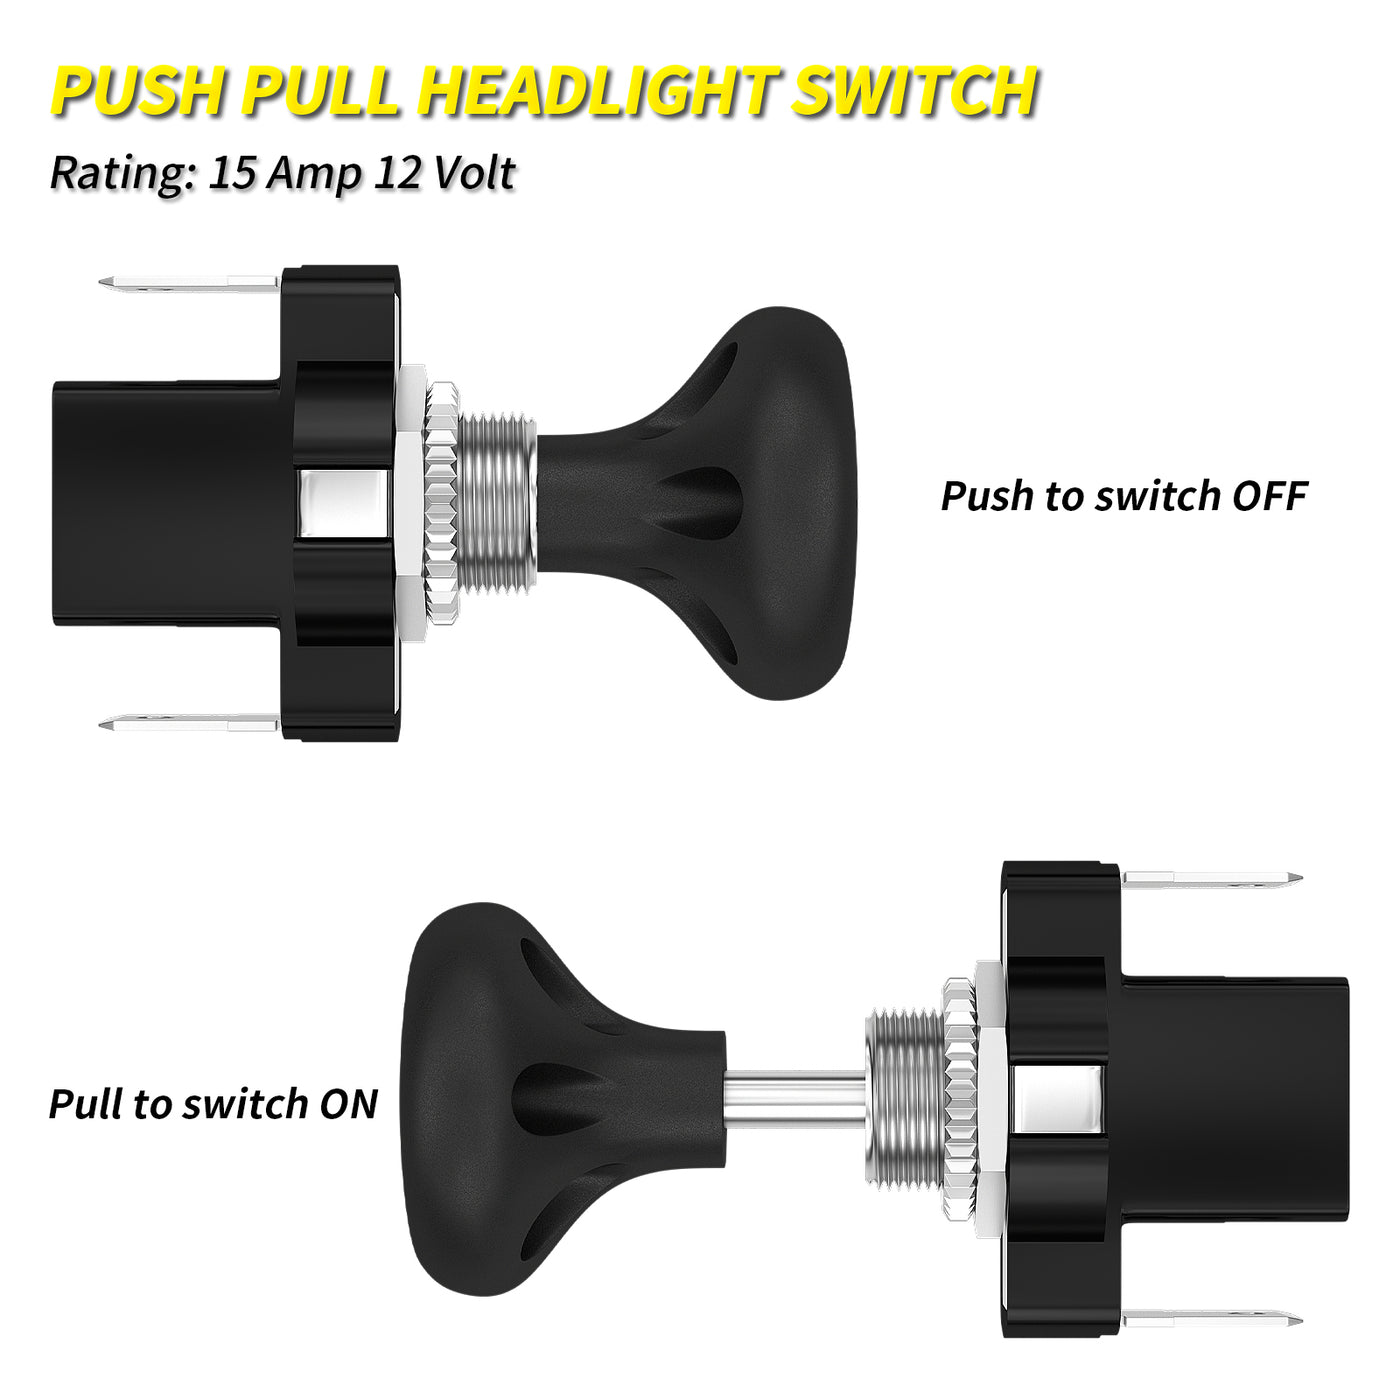 ASW-05A ON-OFF Push Pull Headlight Switch